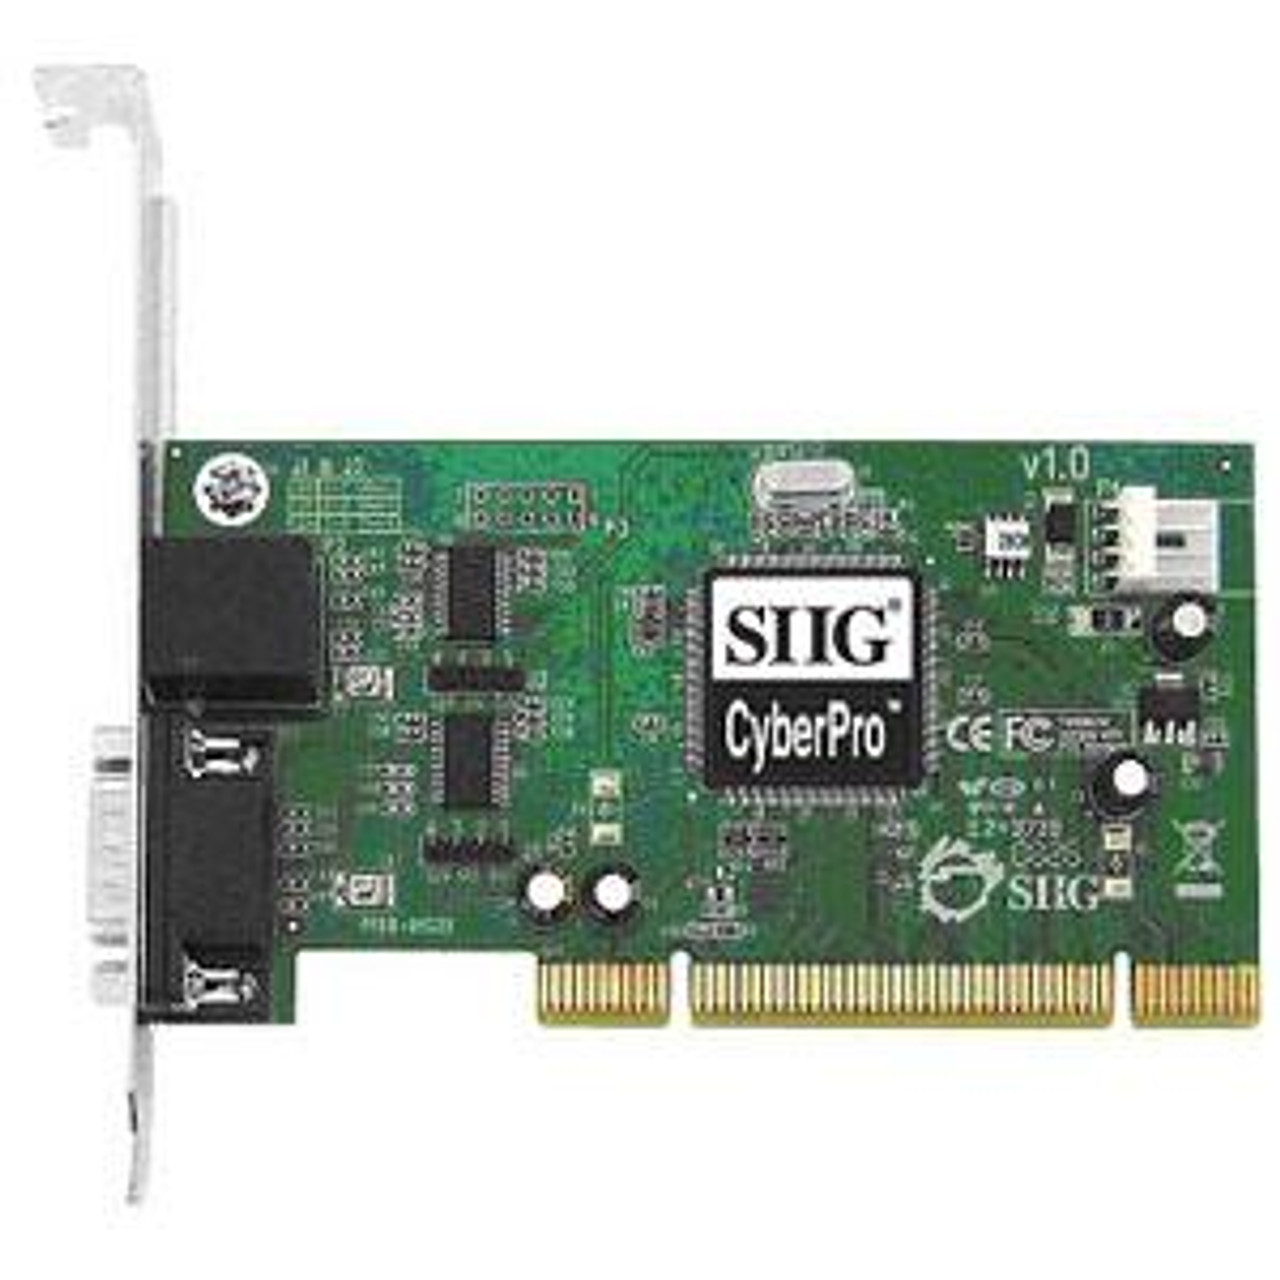 JJ-P00311-S1 SIIG Dp Cyberserial Dual Rj 2pt Pci For Lp Or Fp